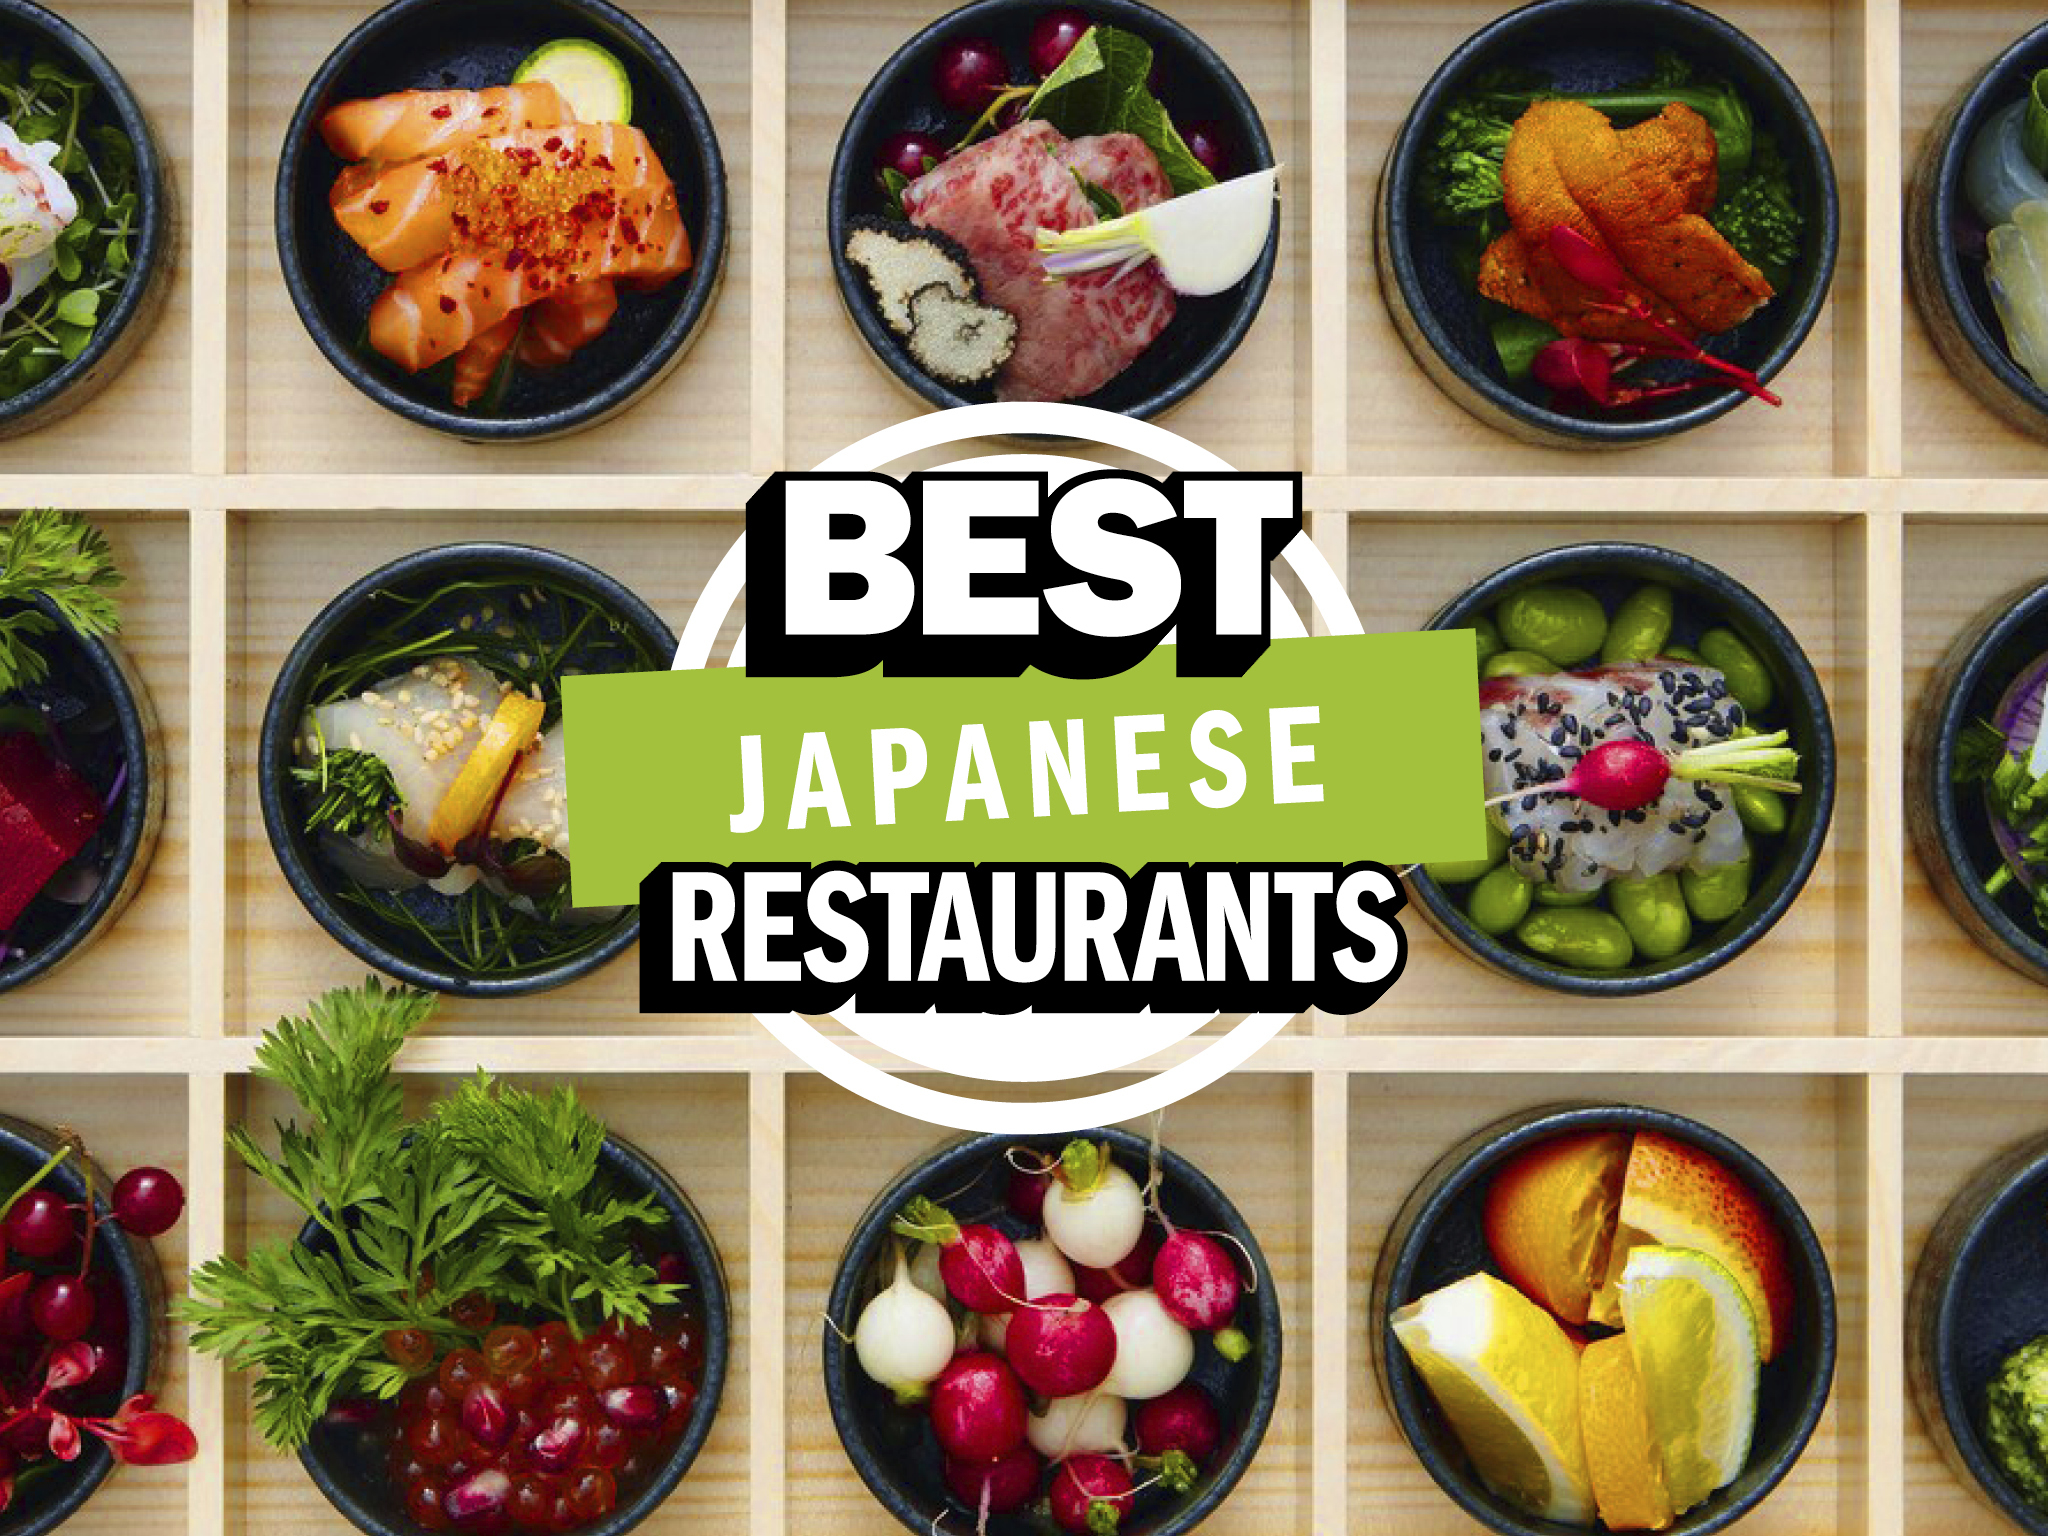 20 Best Japanese Restaurants in London For Sushi, Ramen and More